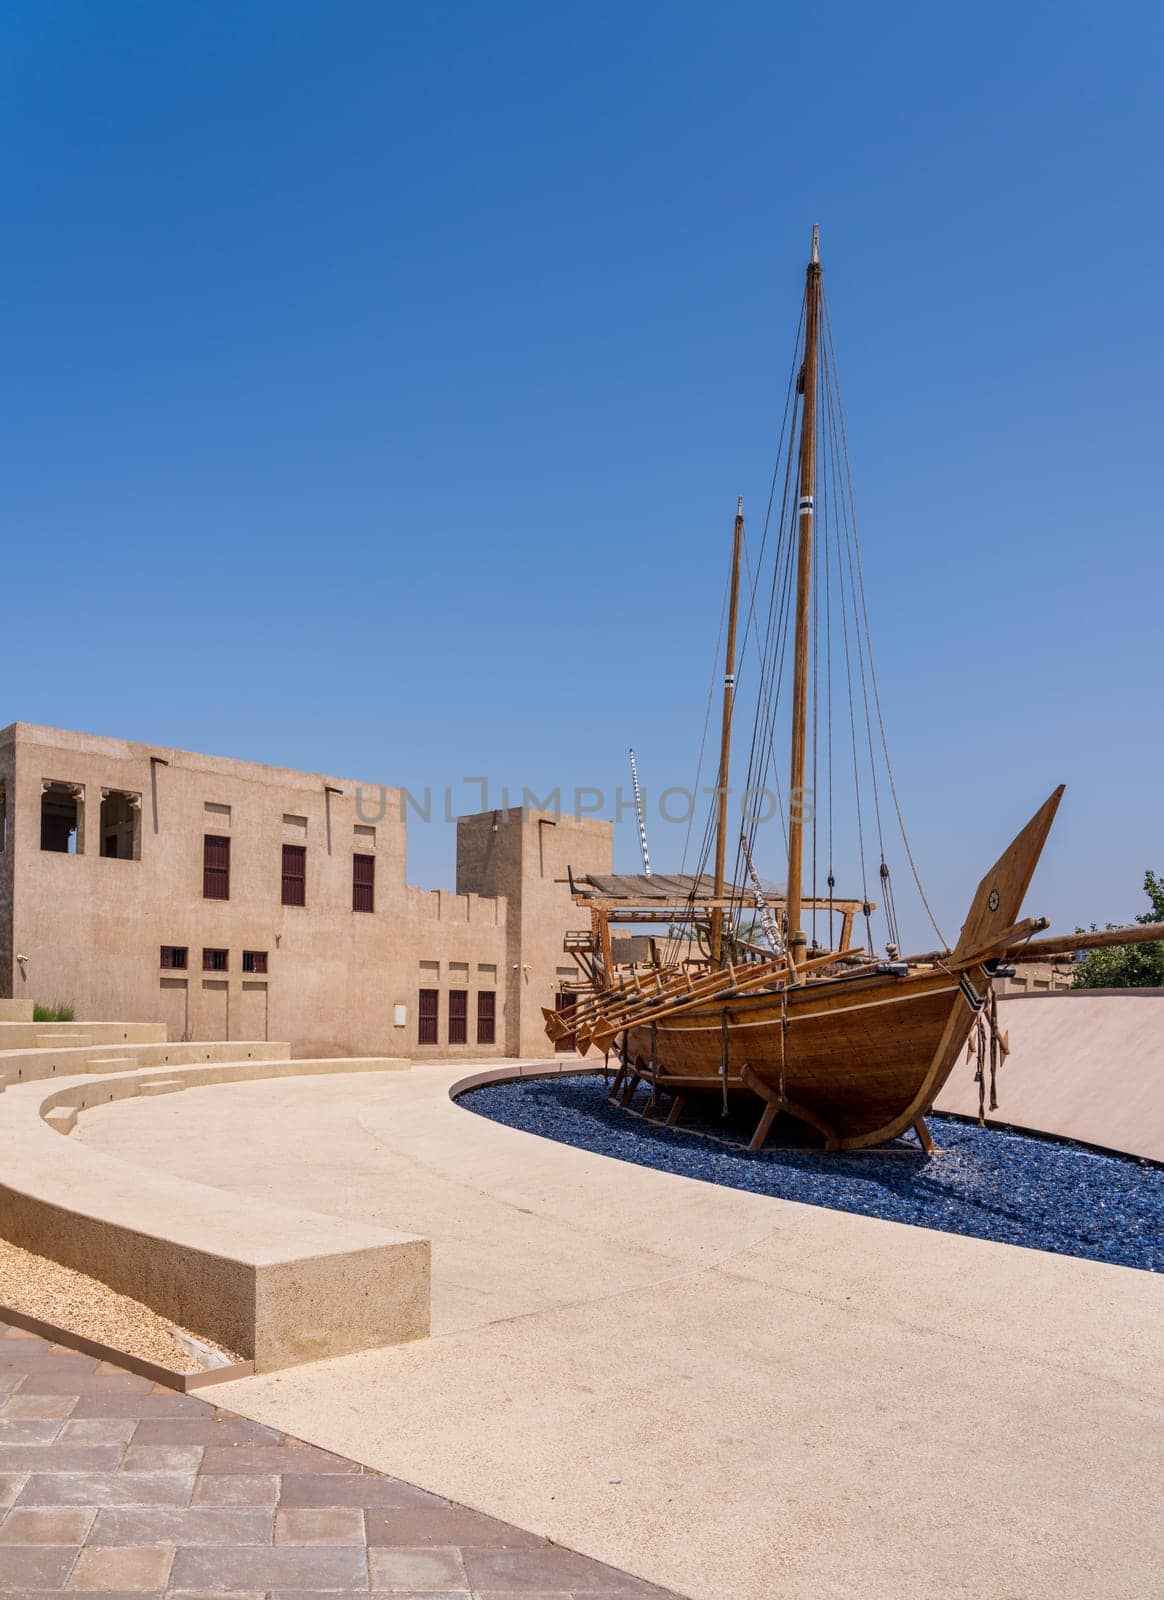 Reconstruction of Dhow in the Al Shindagha district and museum in Bur Dubai